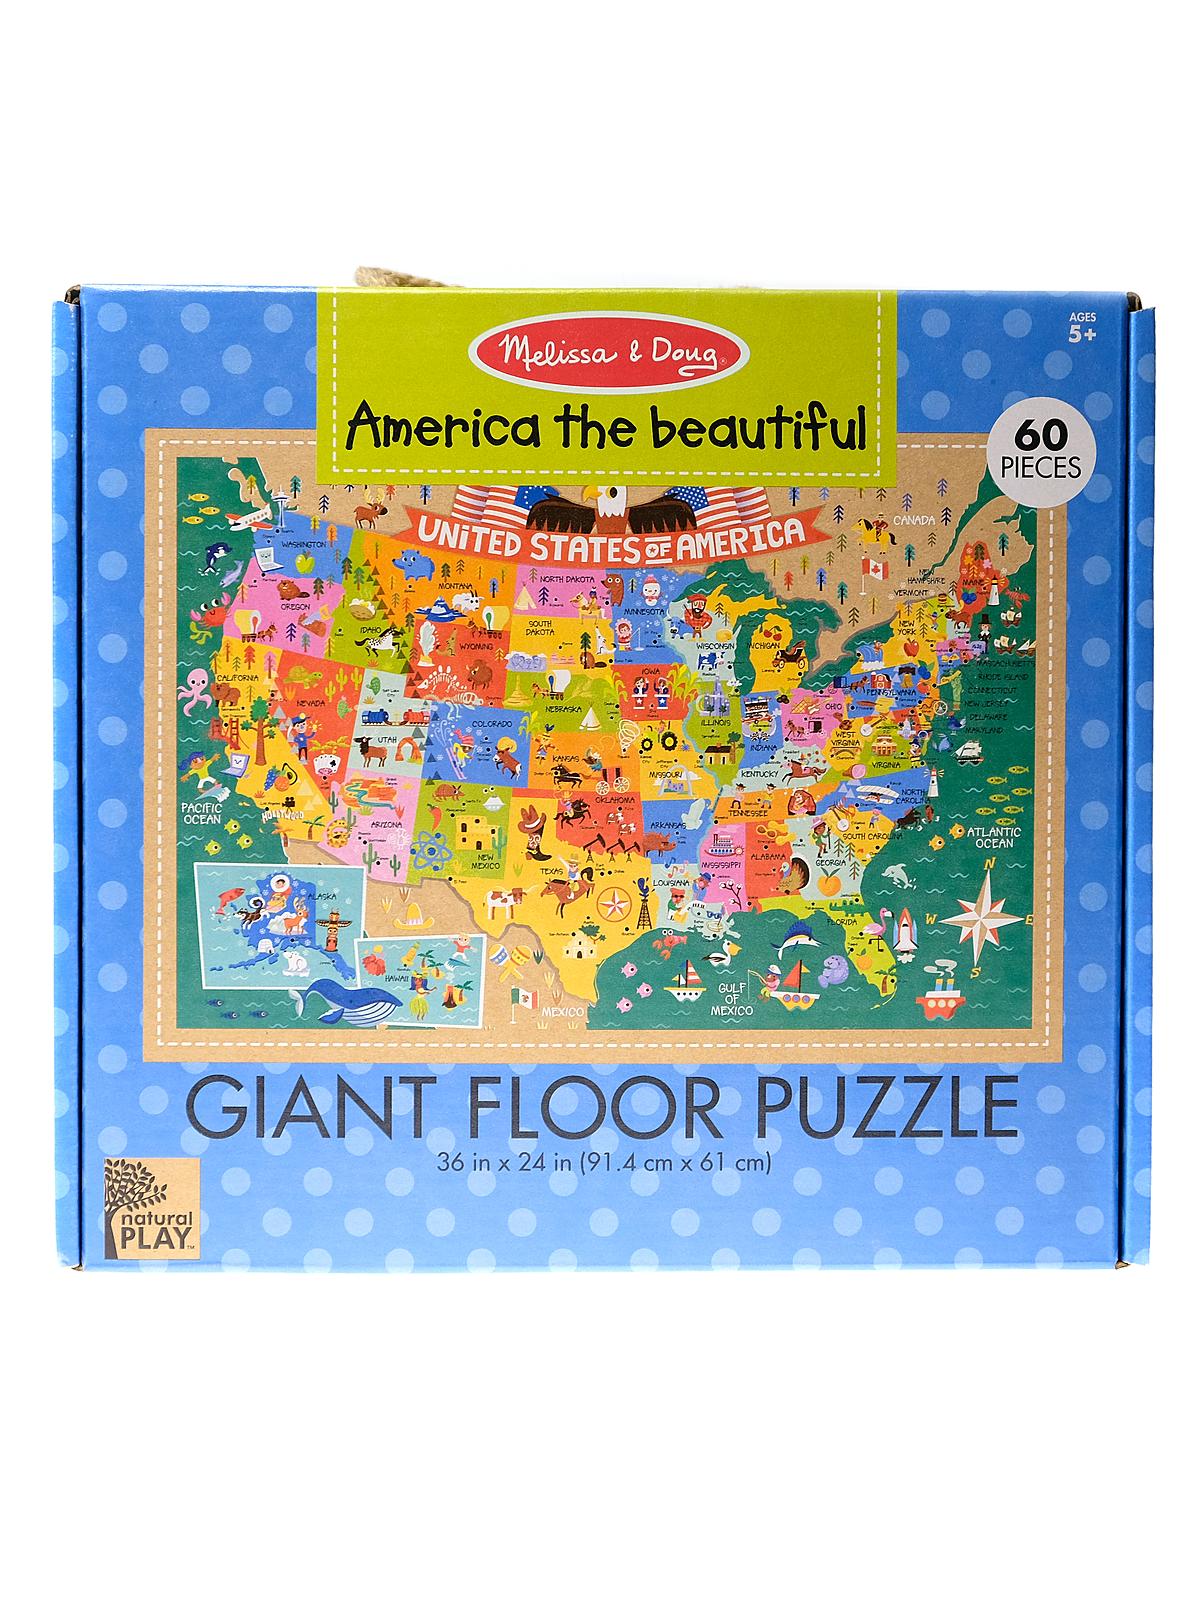 Natural Play Floor Puzzles America The Beautiful 36 In. X 24 In. 60 Pieces